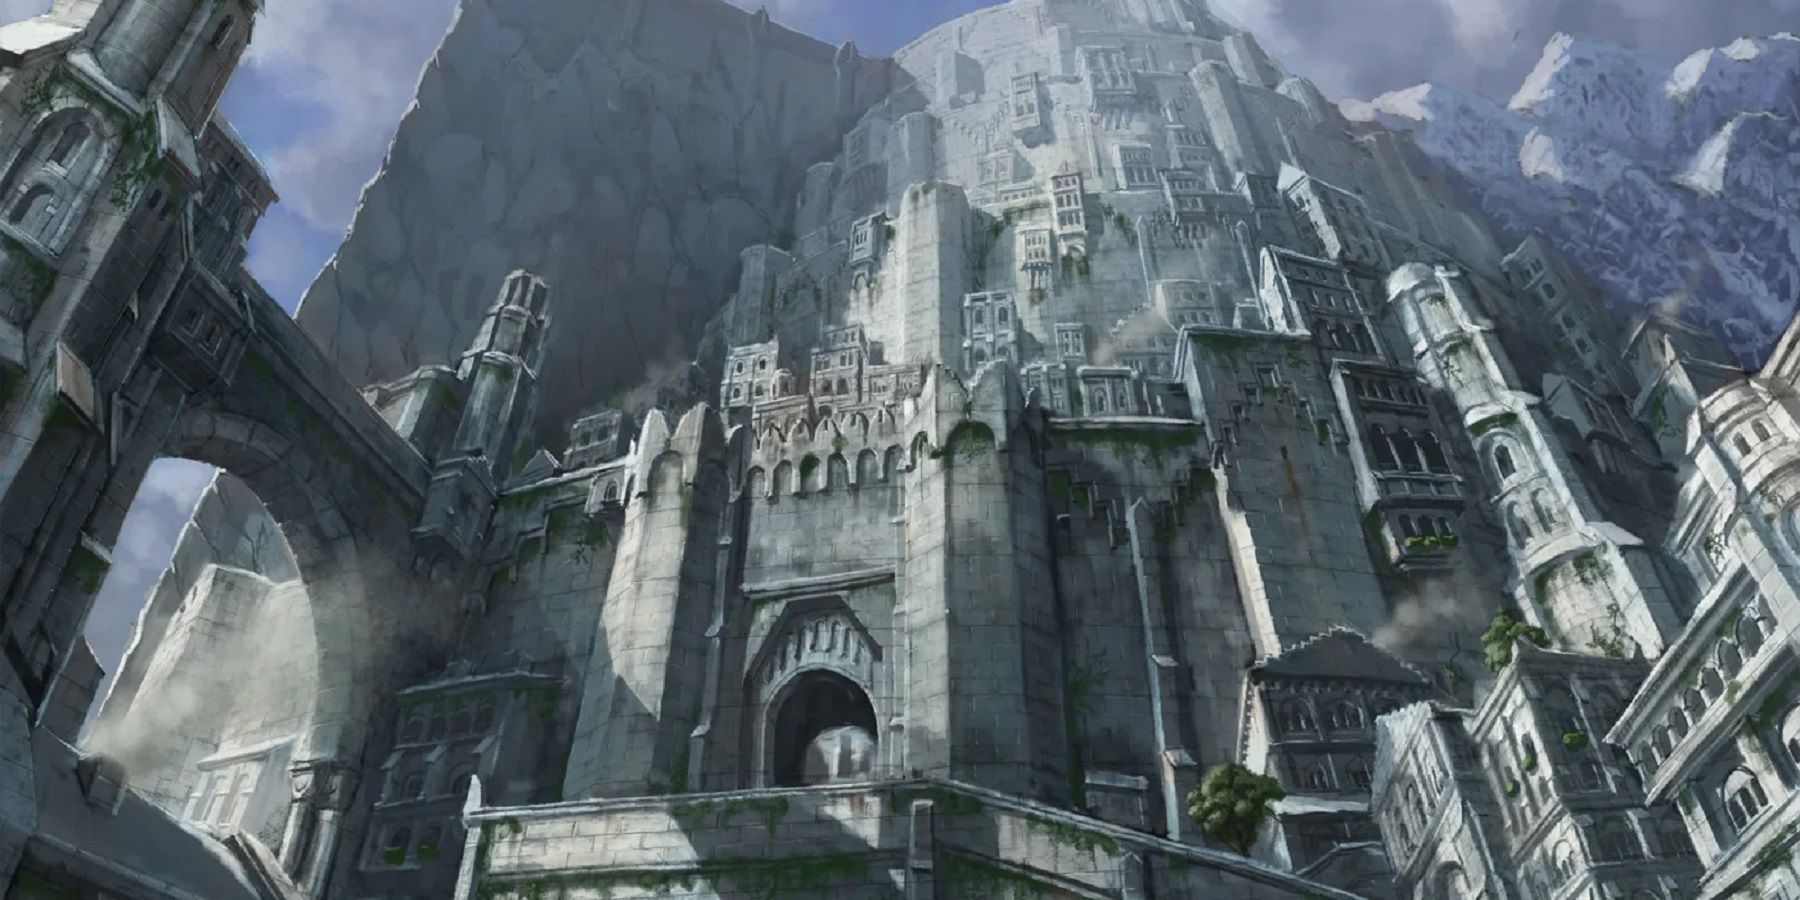 Minecraft Player Recreates Part Minas Tirith from Lord of the Rings